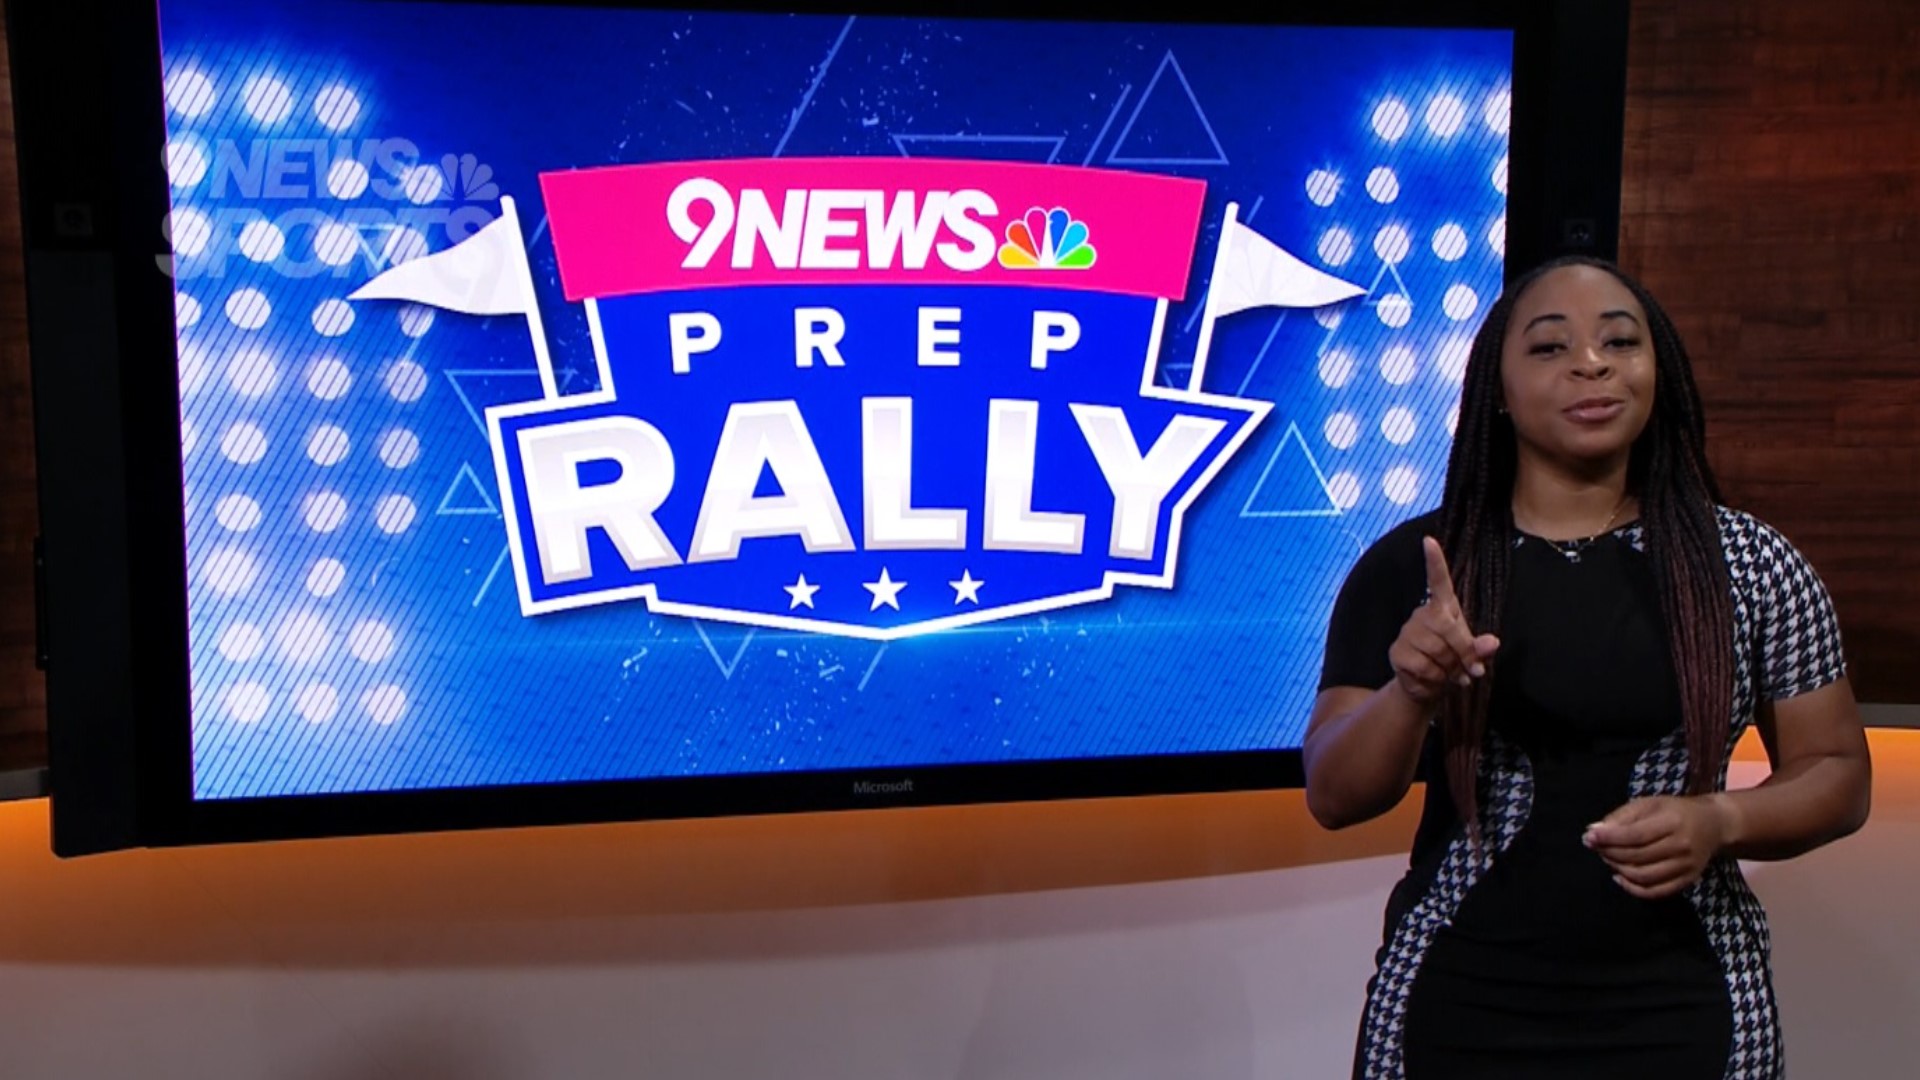 Catch up on the latest high school sports news with the Sunday morning Prep Rally!